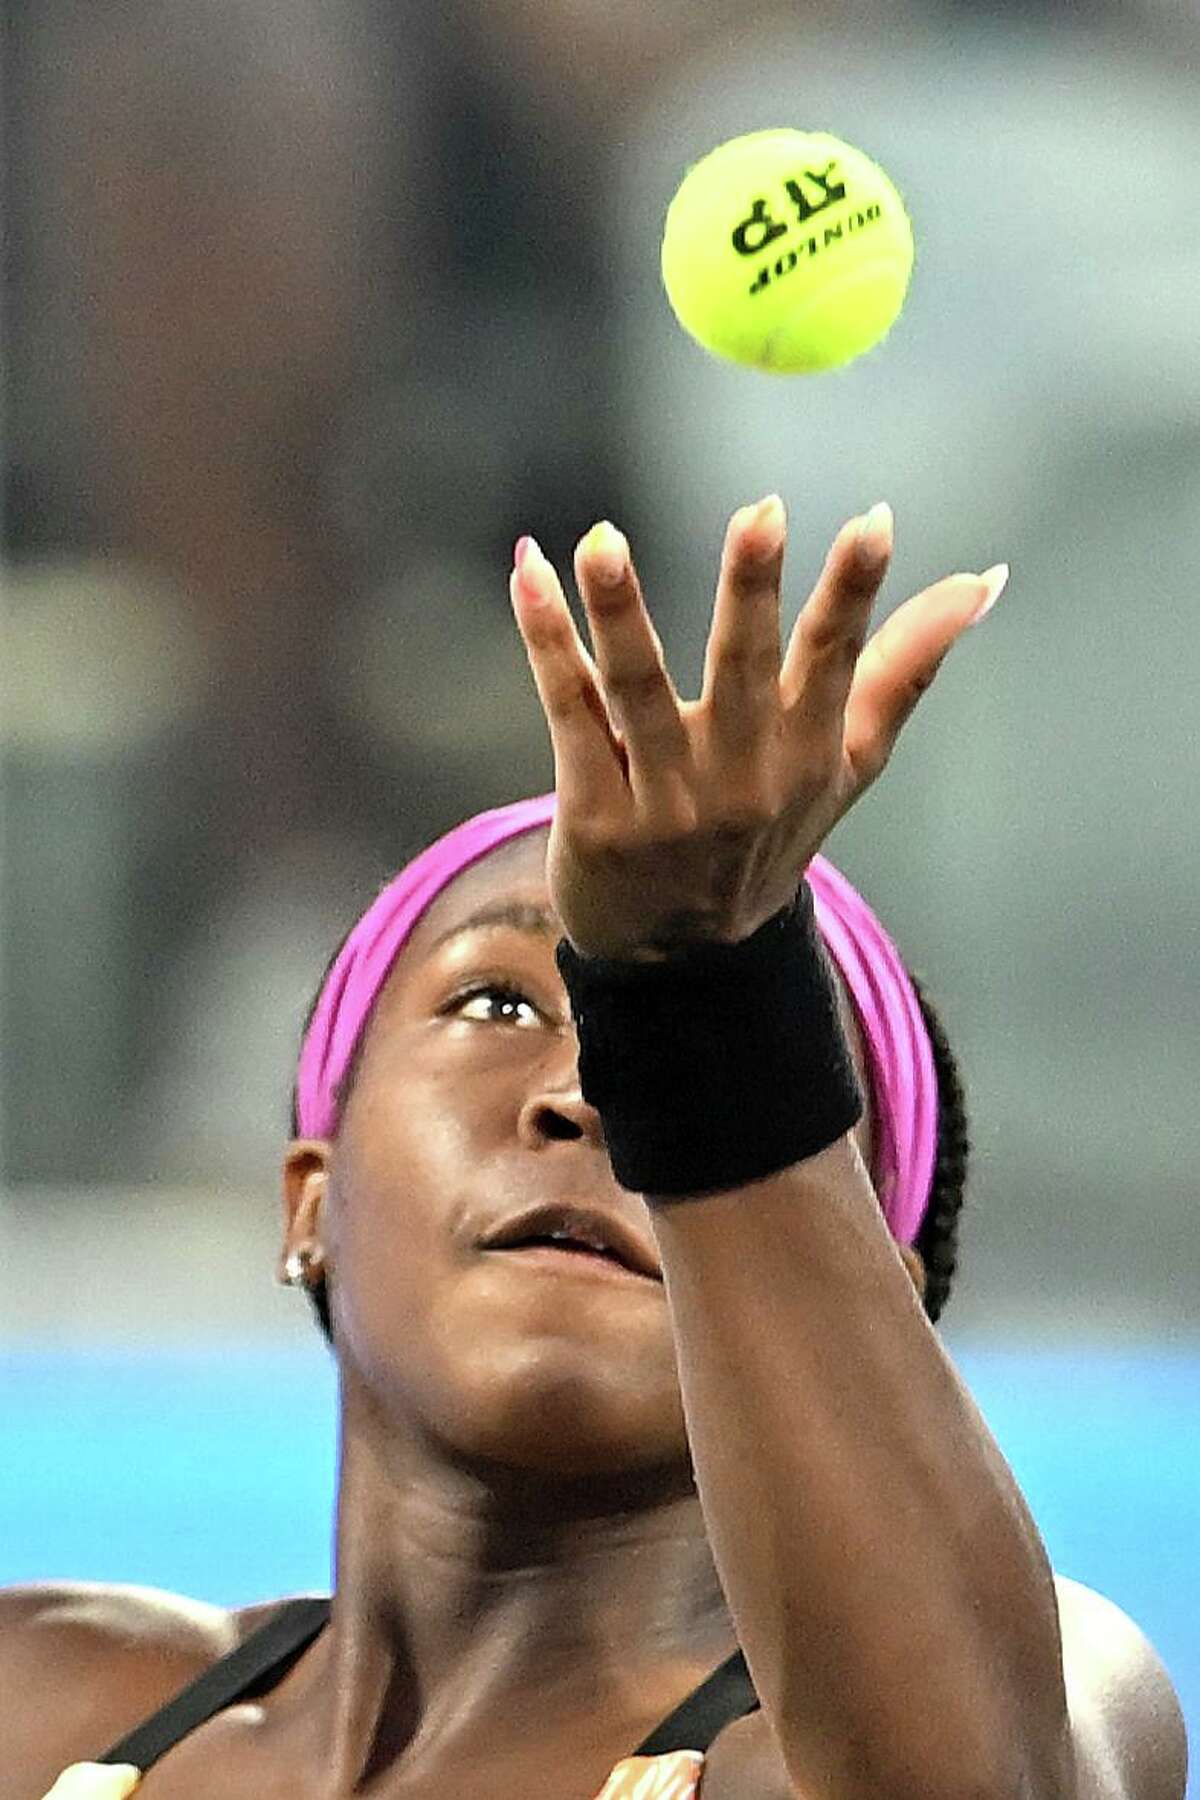 ATLANTA, GA - JULY 24: Coco Gauff competes during an exhibition match against Taylor Townsend at Atlantic Station on July 24, 2022 in Atlanta, Georgia. (Photo by Adam Hagy/Getty Images)